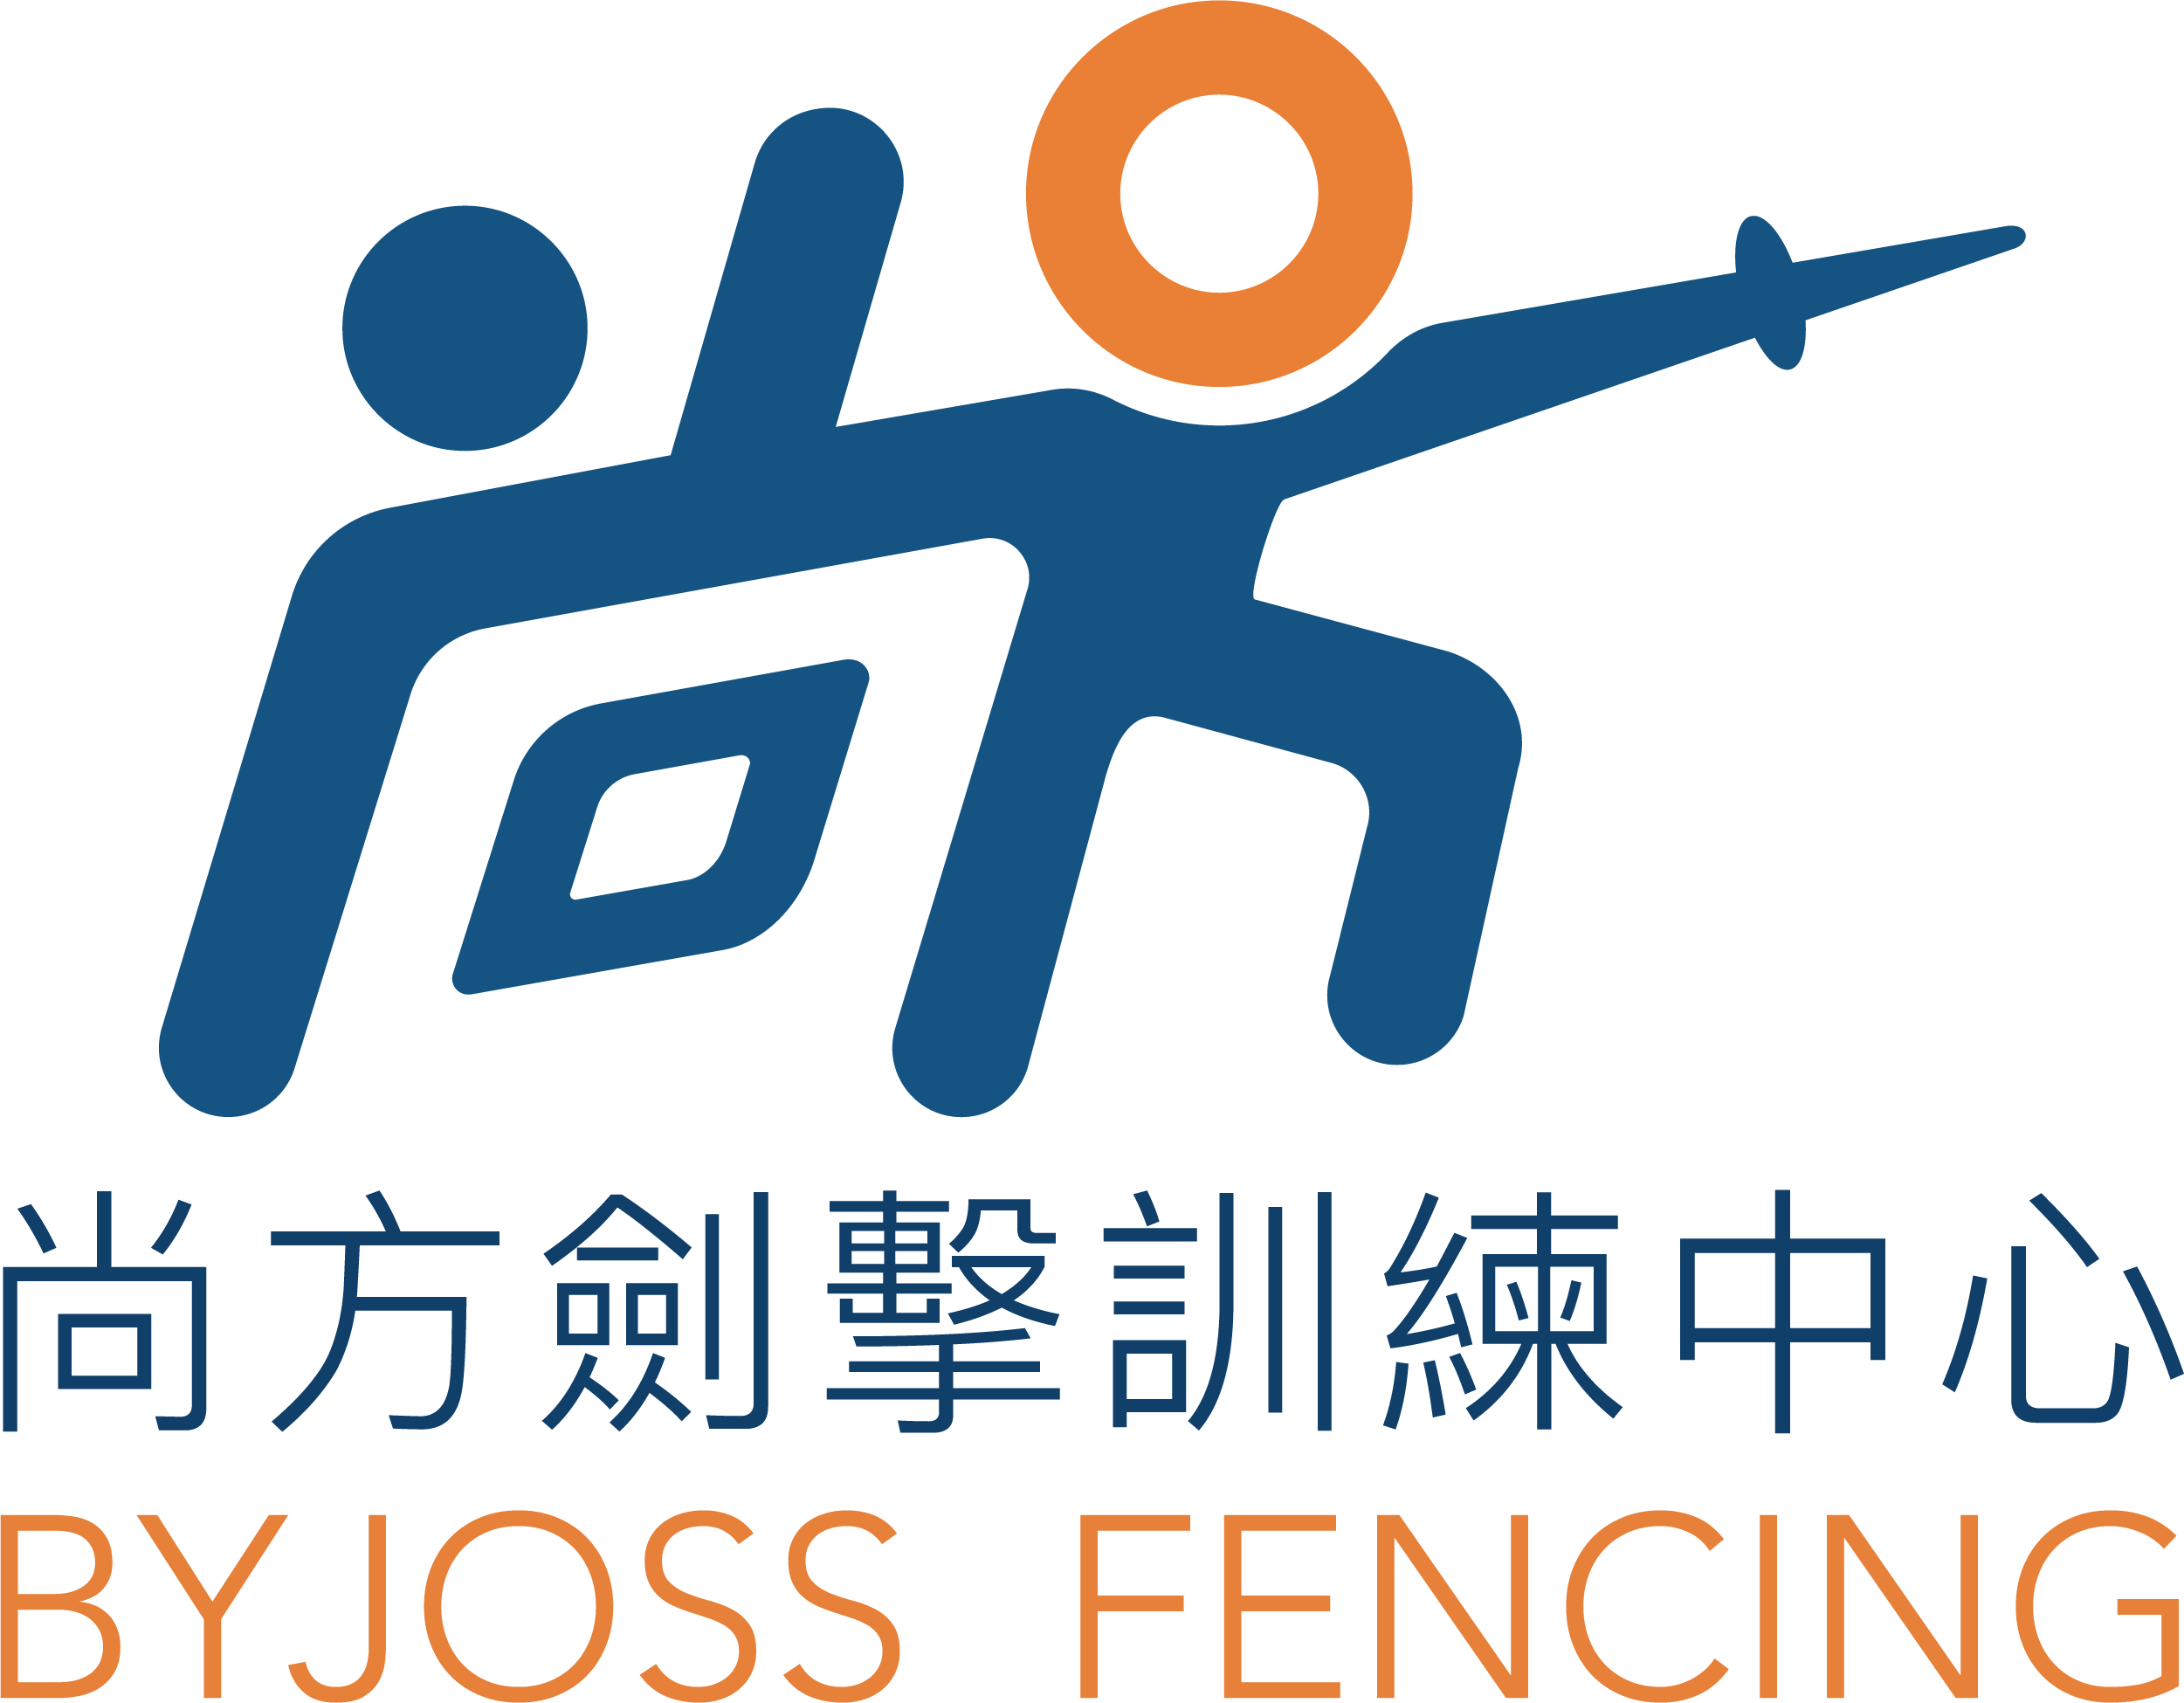 Byjoss Fencing